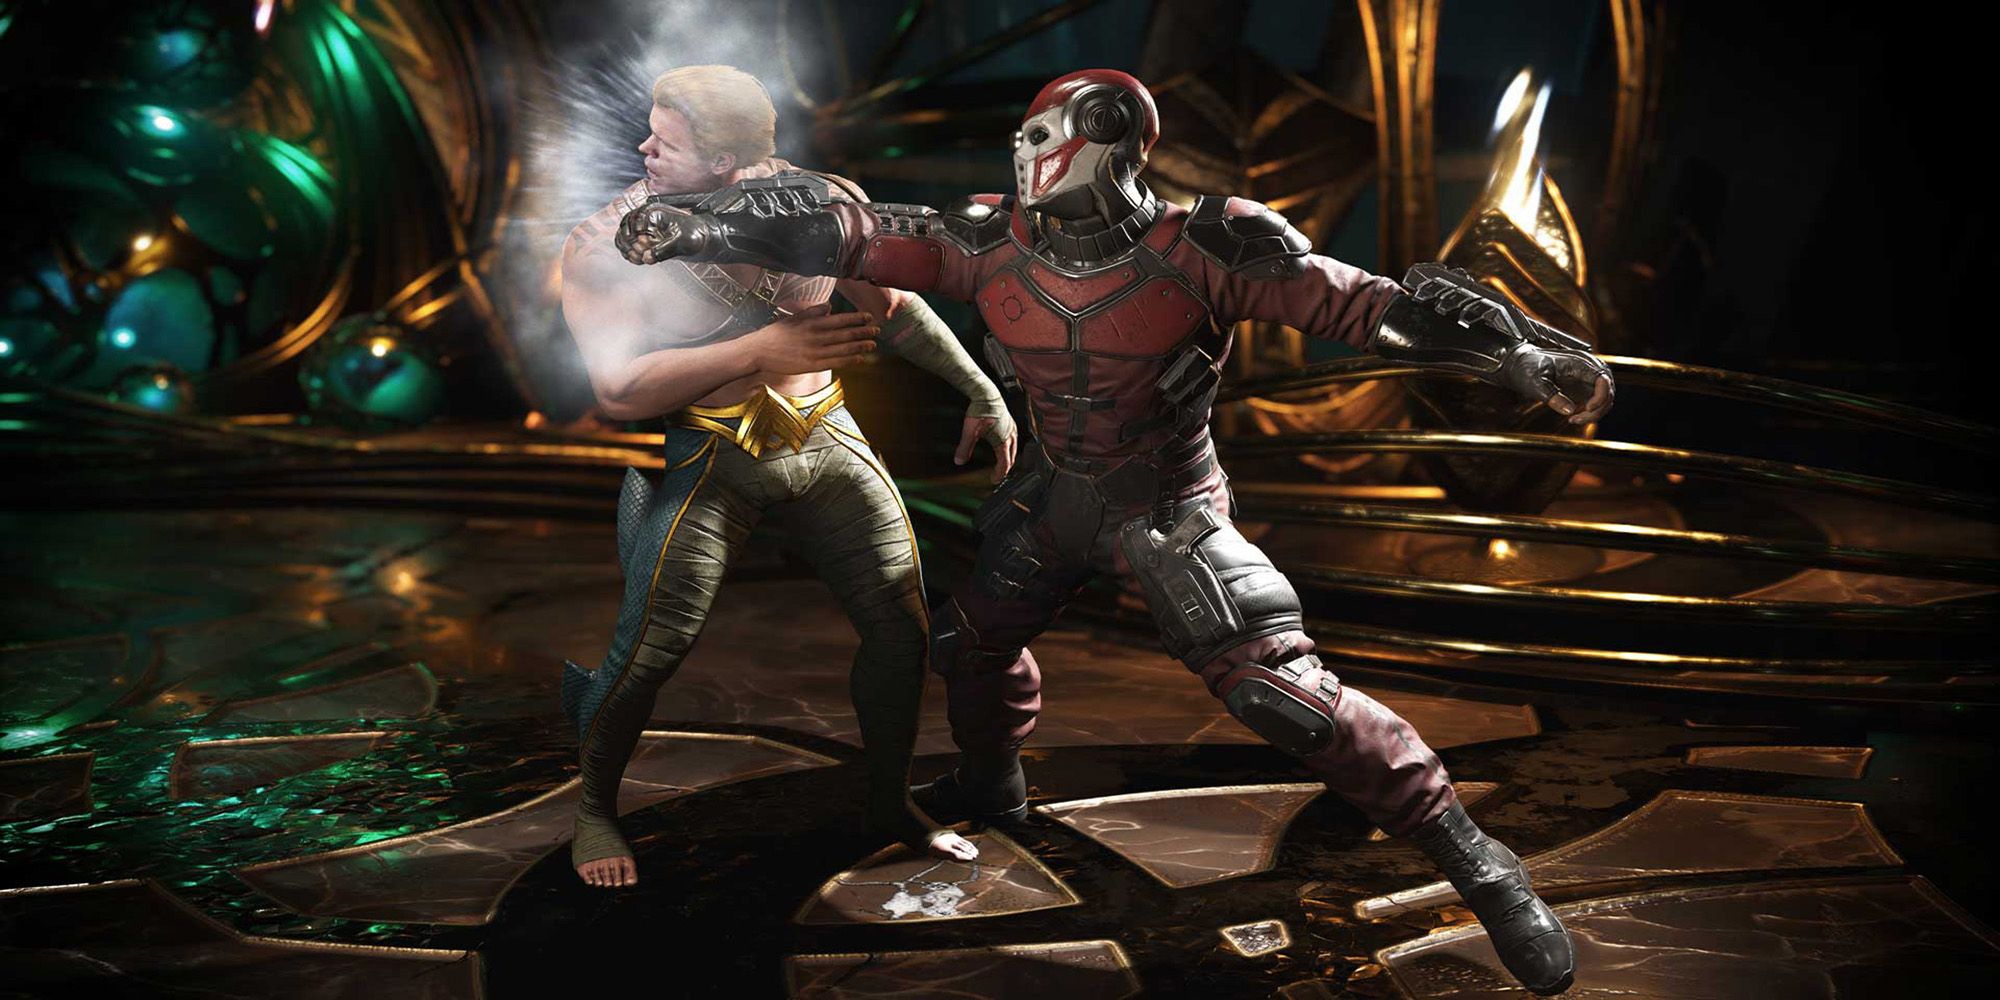 Two characters fighting in Injustice 2.